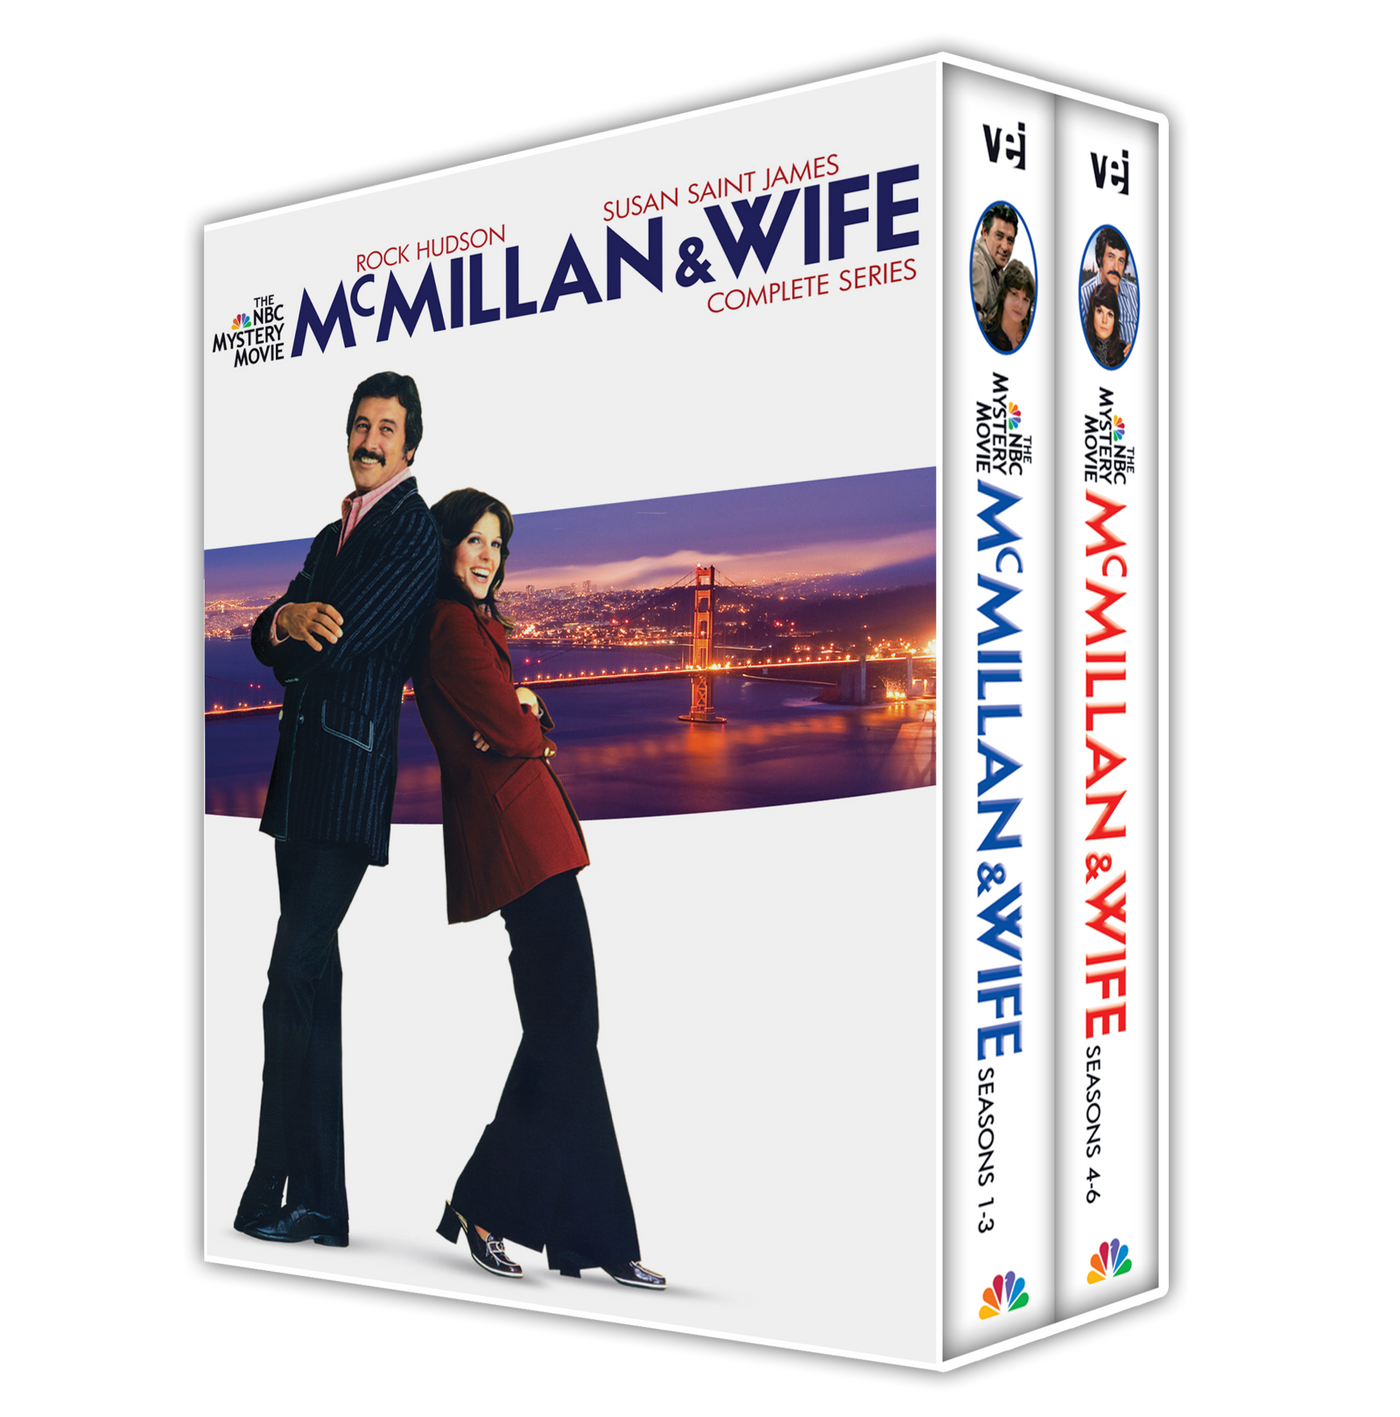 Mcmillan and wife dvd collection, Rock Hudson, Susant saint james, Columbo, Mcloud, NBC Mystery Movie line-up – Visual Entertainment